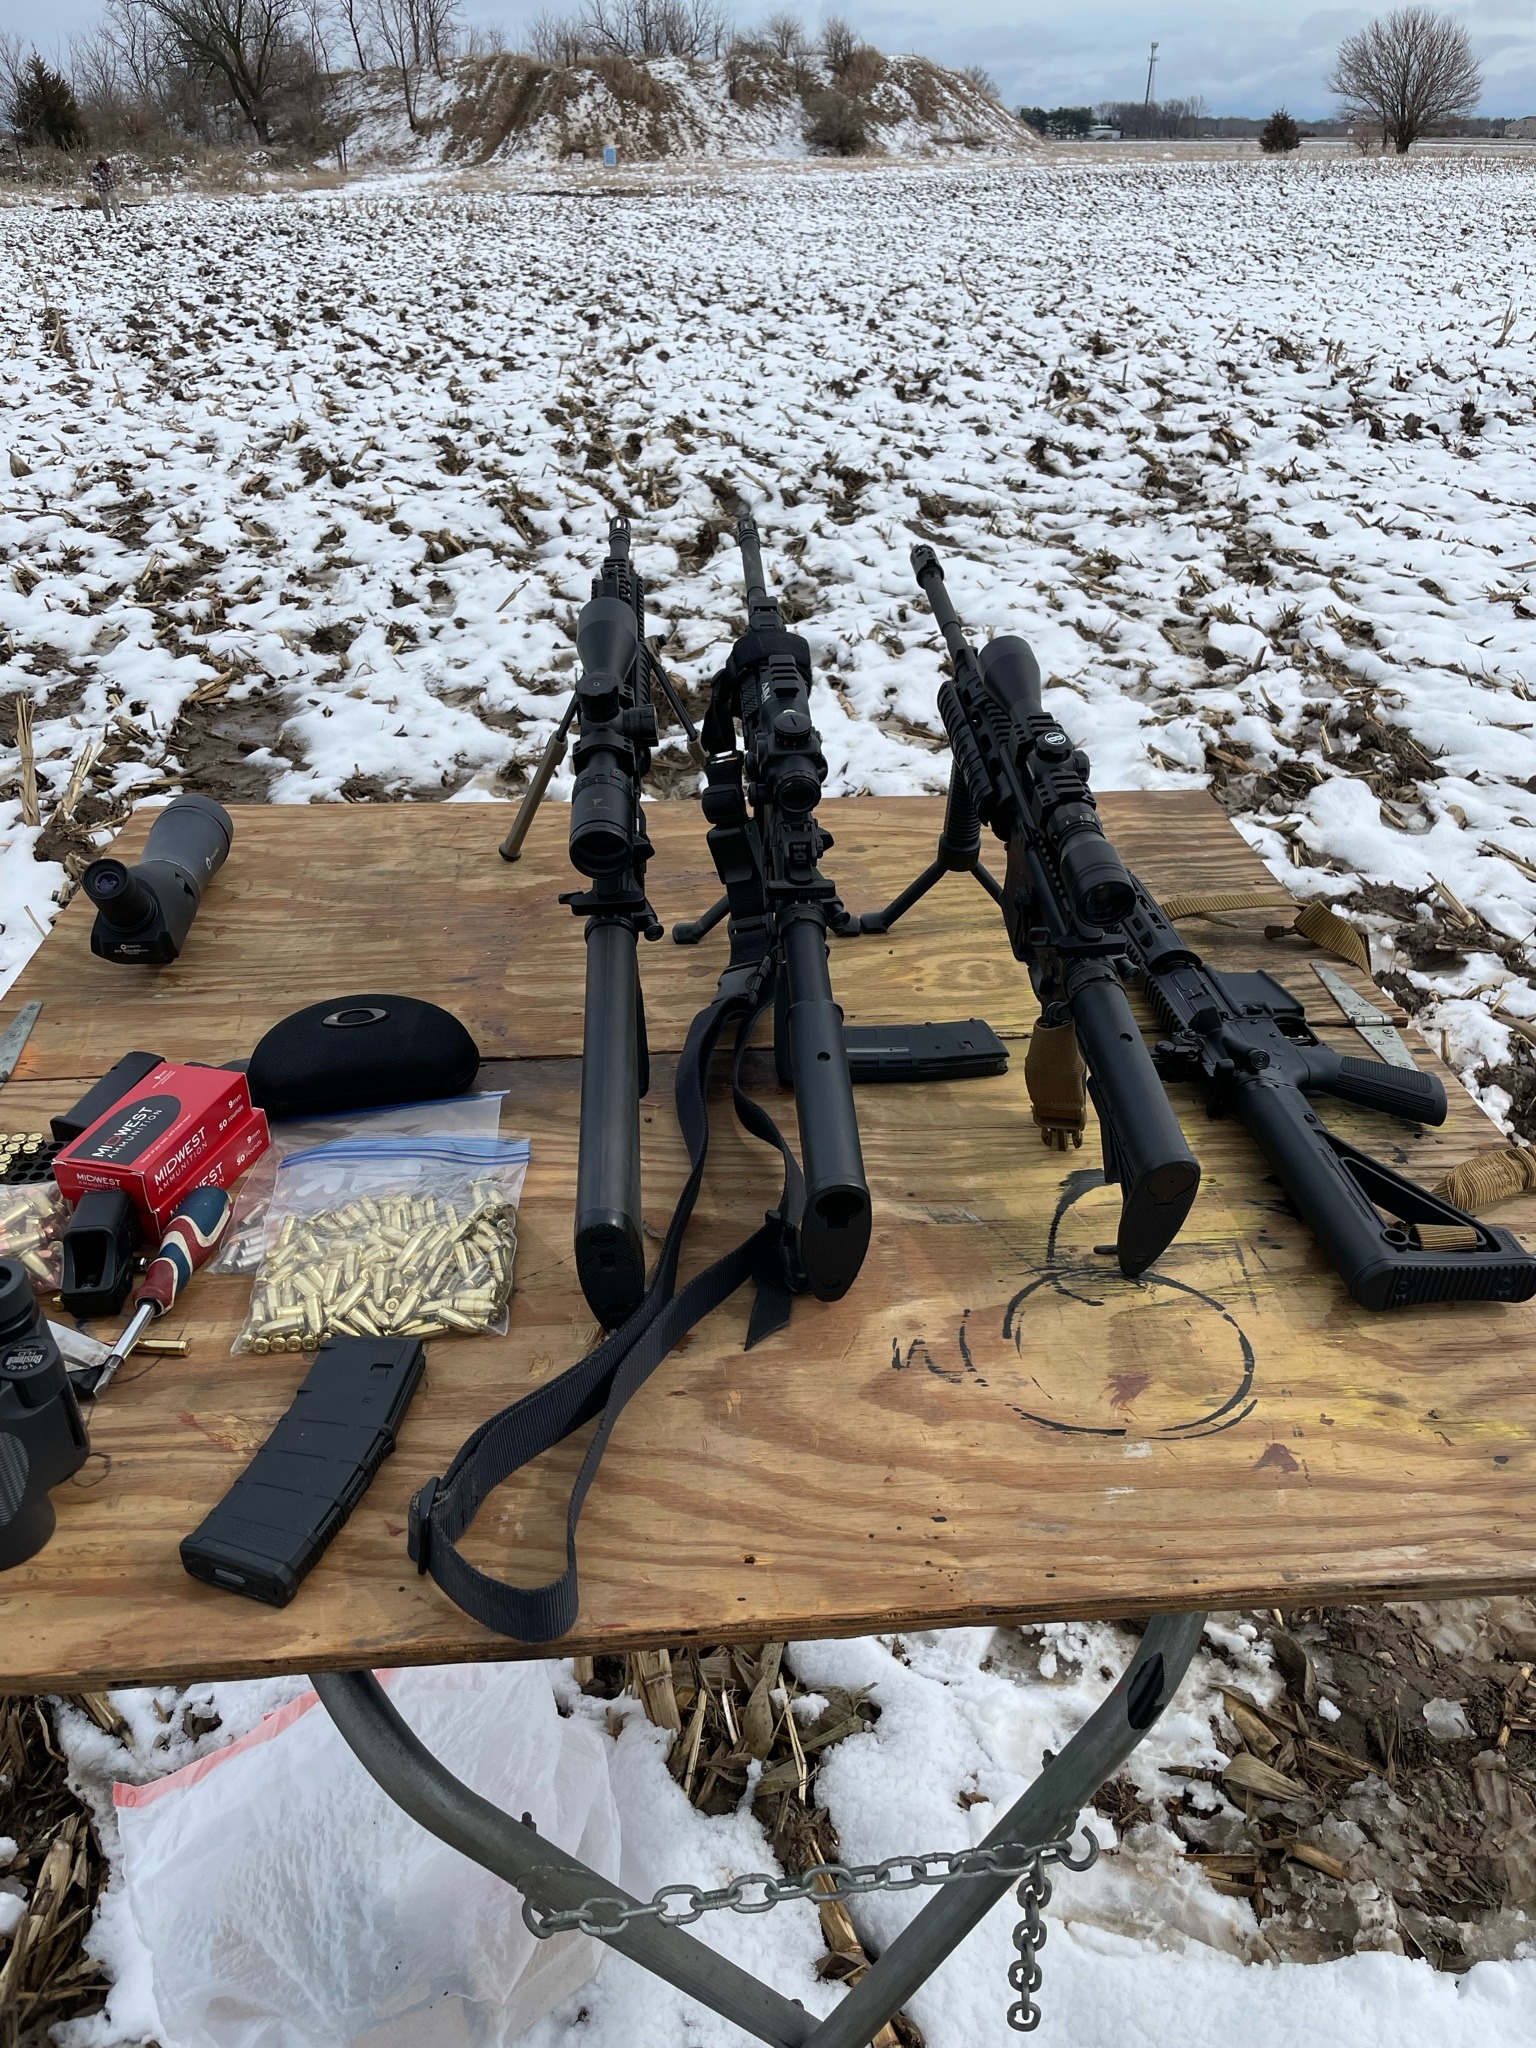 Sex Great range day today, buddy from bootcamp pictures